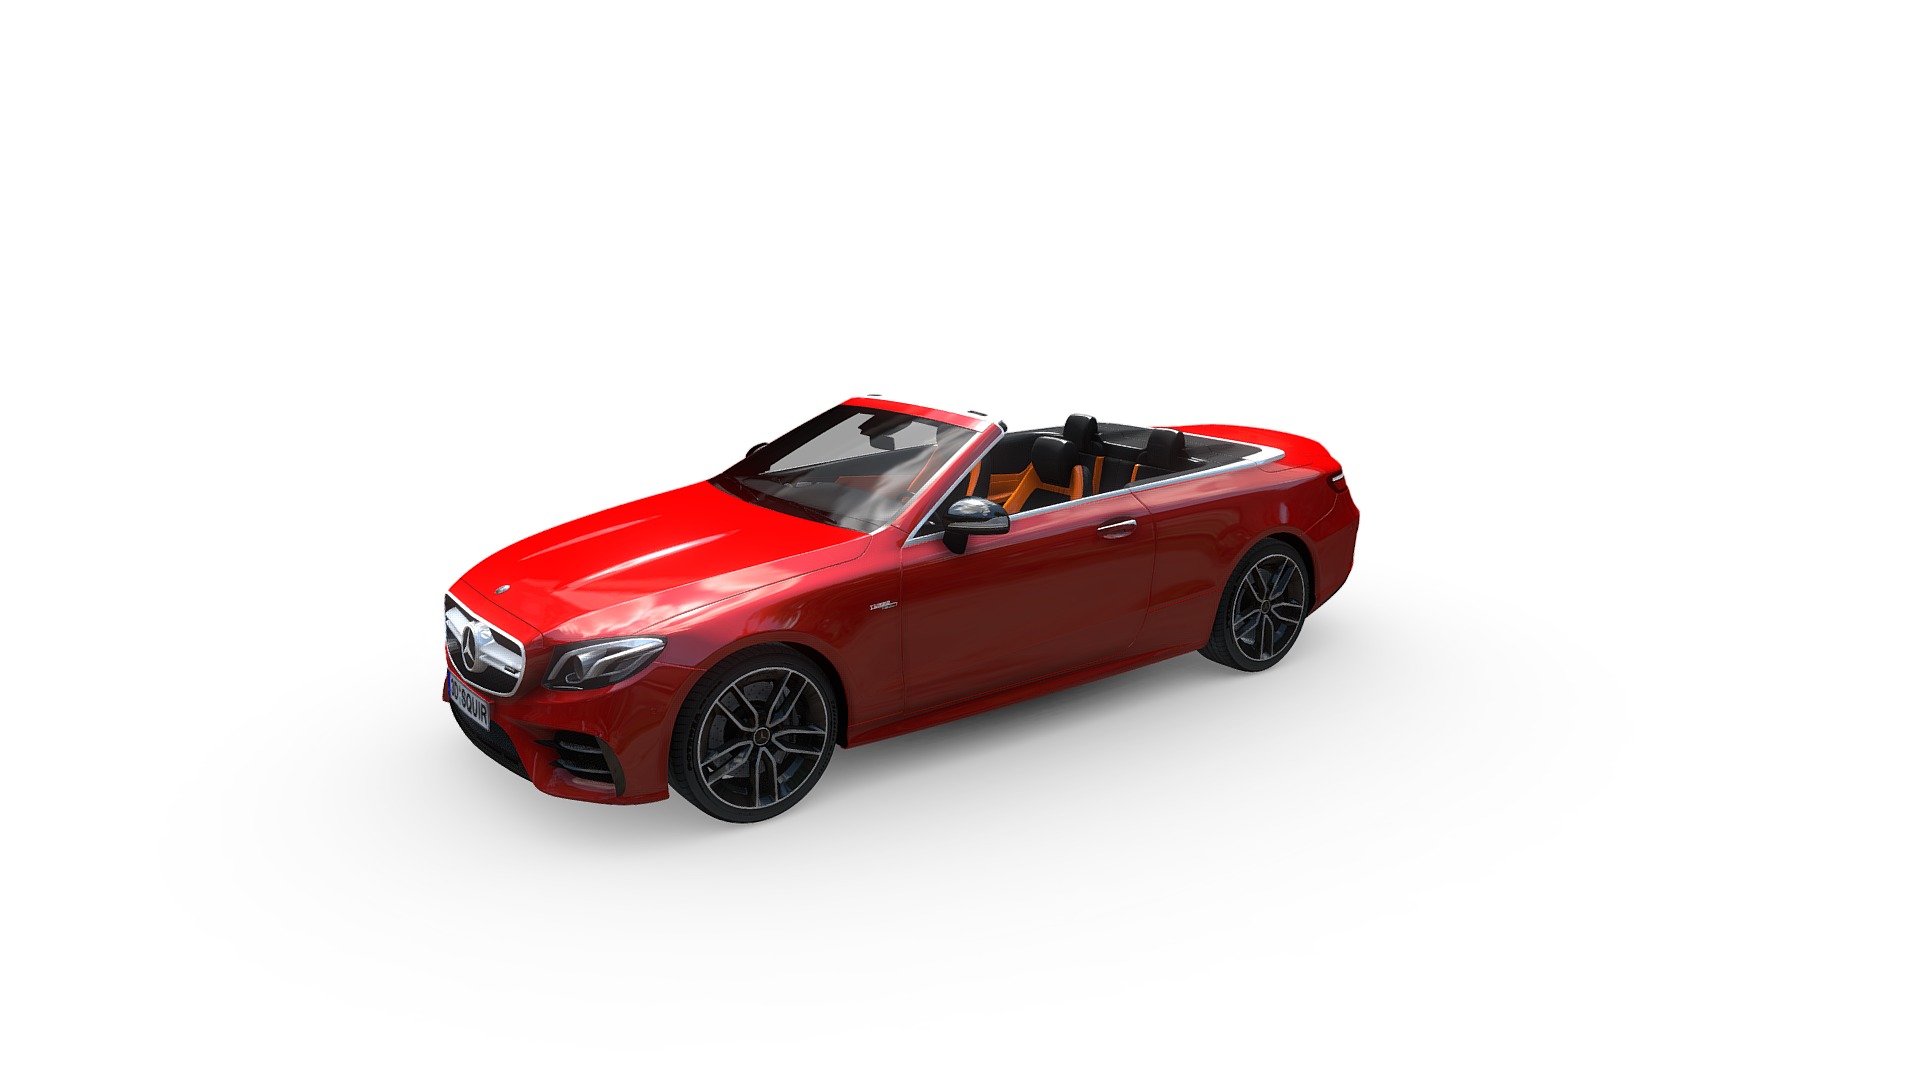 3D model Mercedes- Benz E53 AMG Cabrio 2019 - This is a 3D model of the Mercedes- Benz E53 AMG Cabrio 2019. The 3D model is about a red sports car.